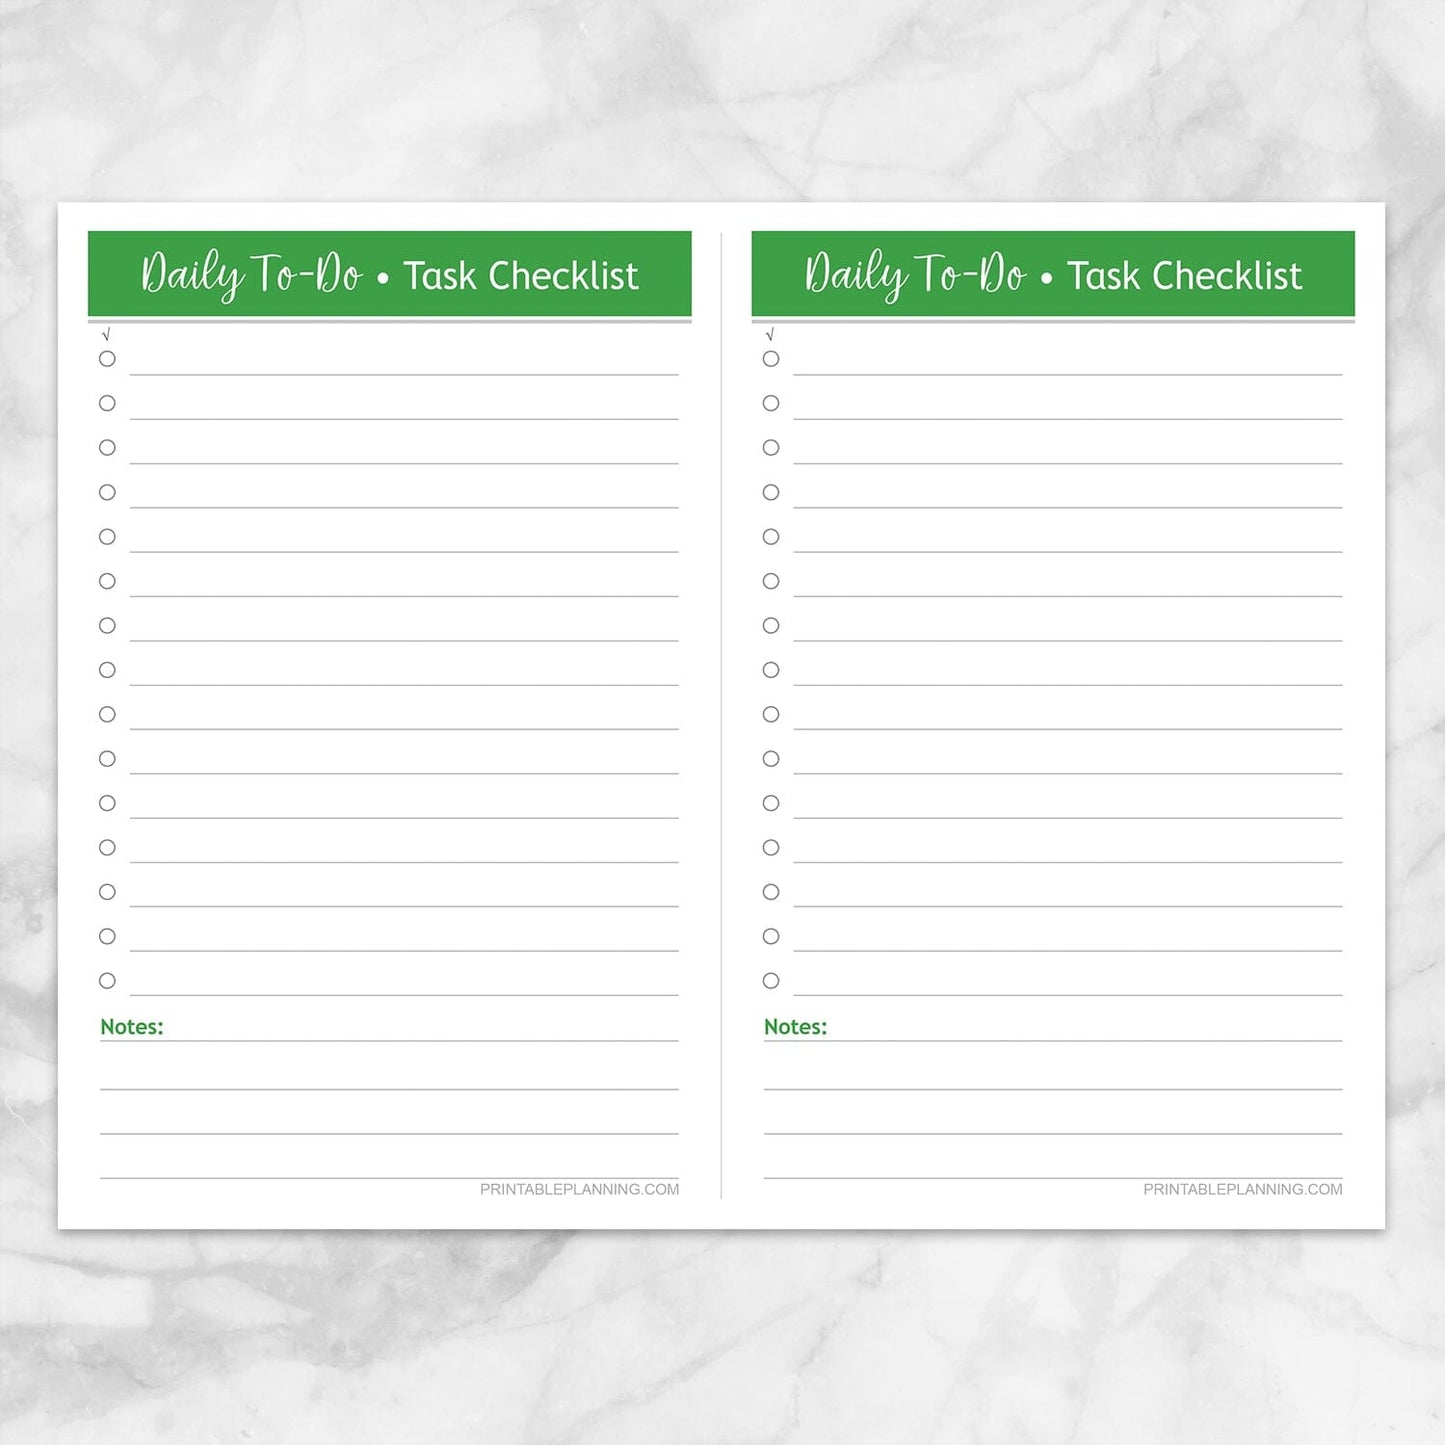 Printable Daily To-Do Lists - 2 Per Page - Task Checklists in green at Printable Planning.